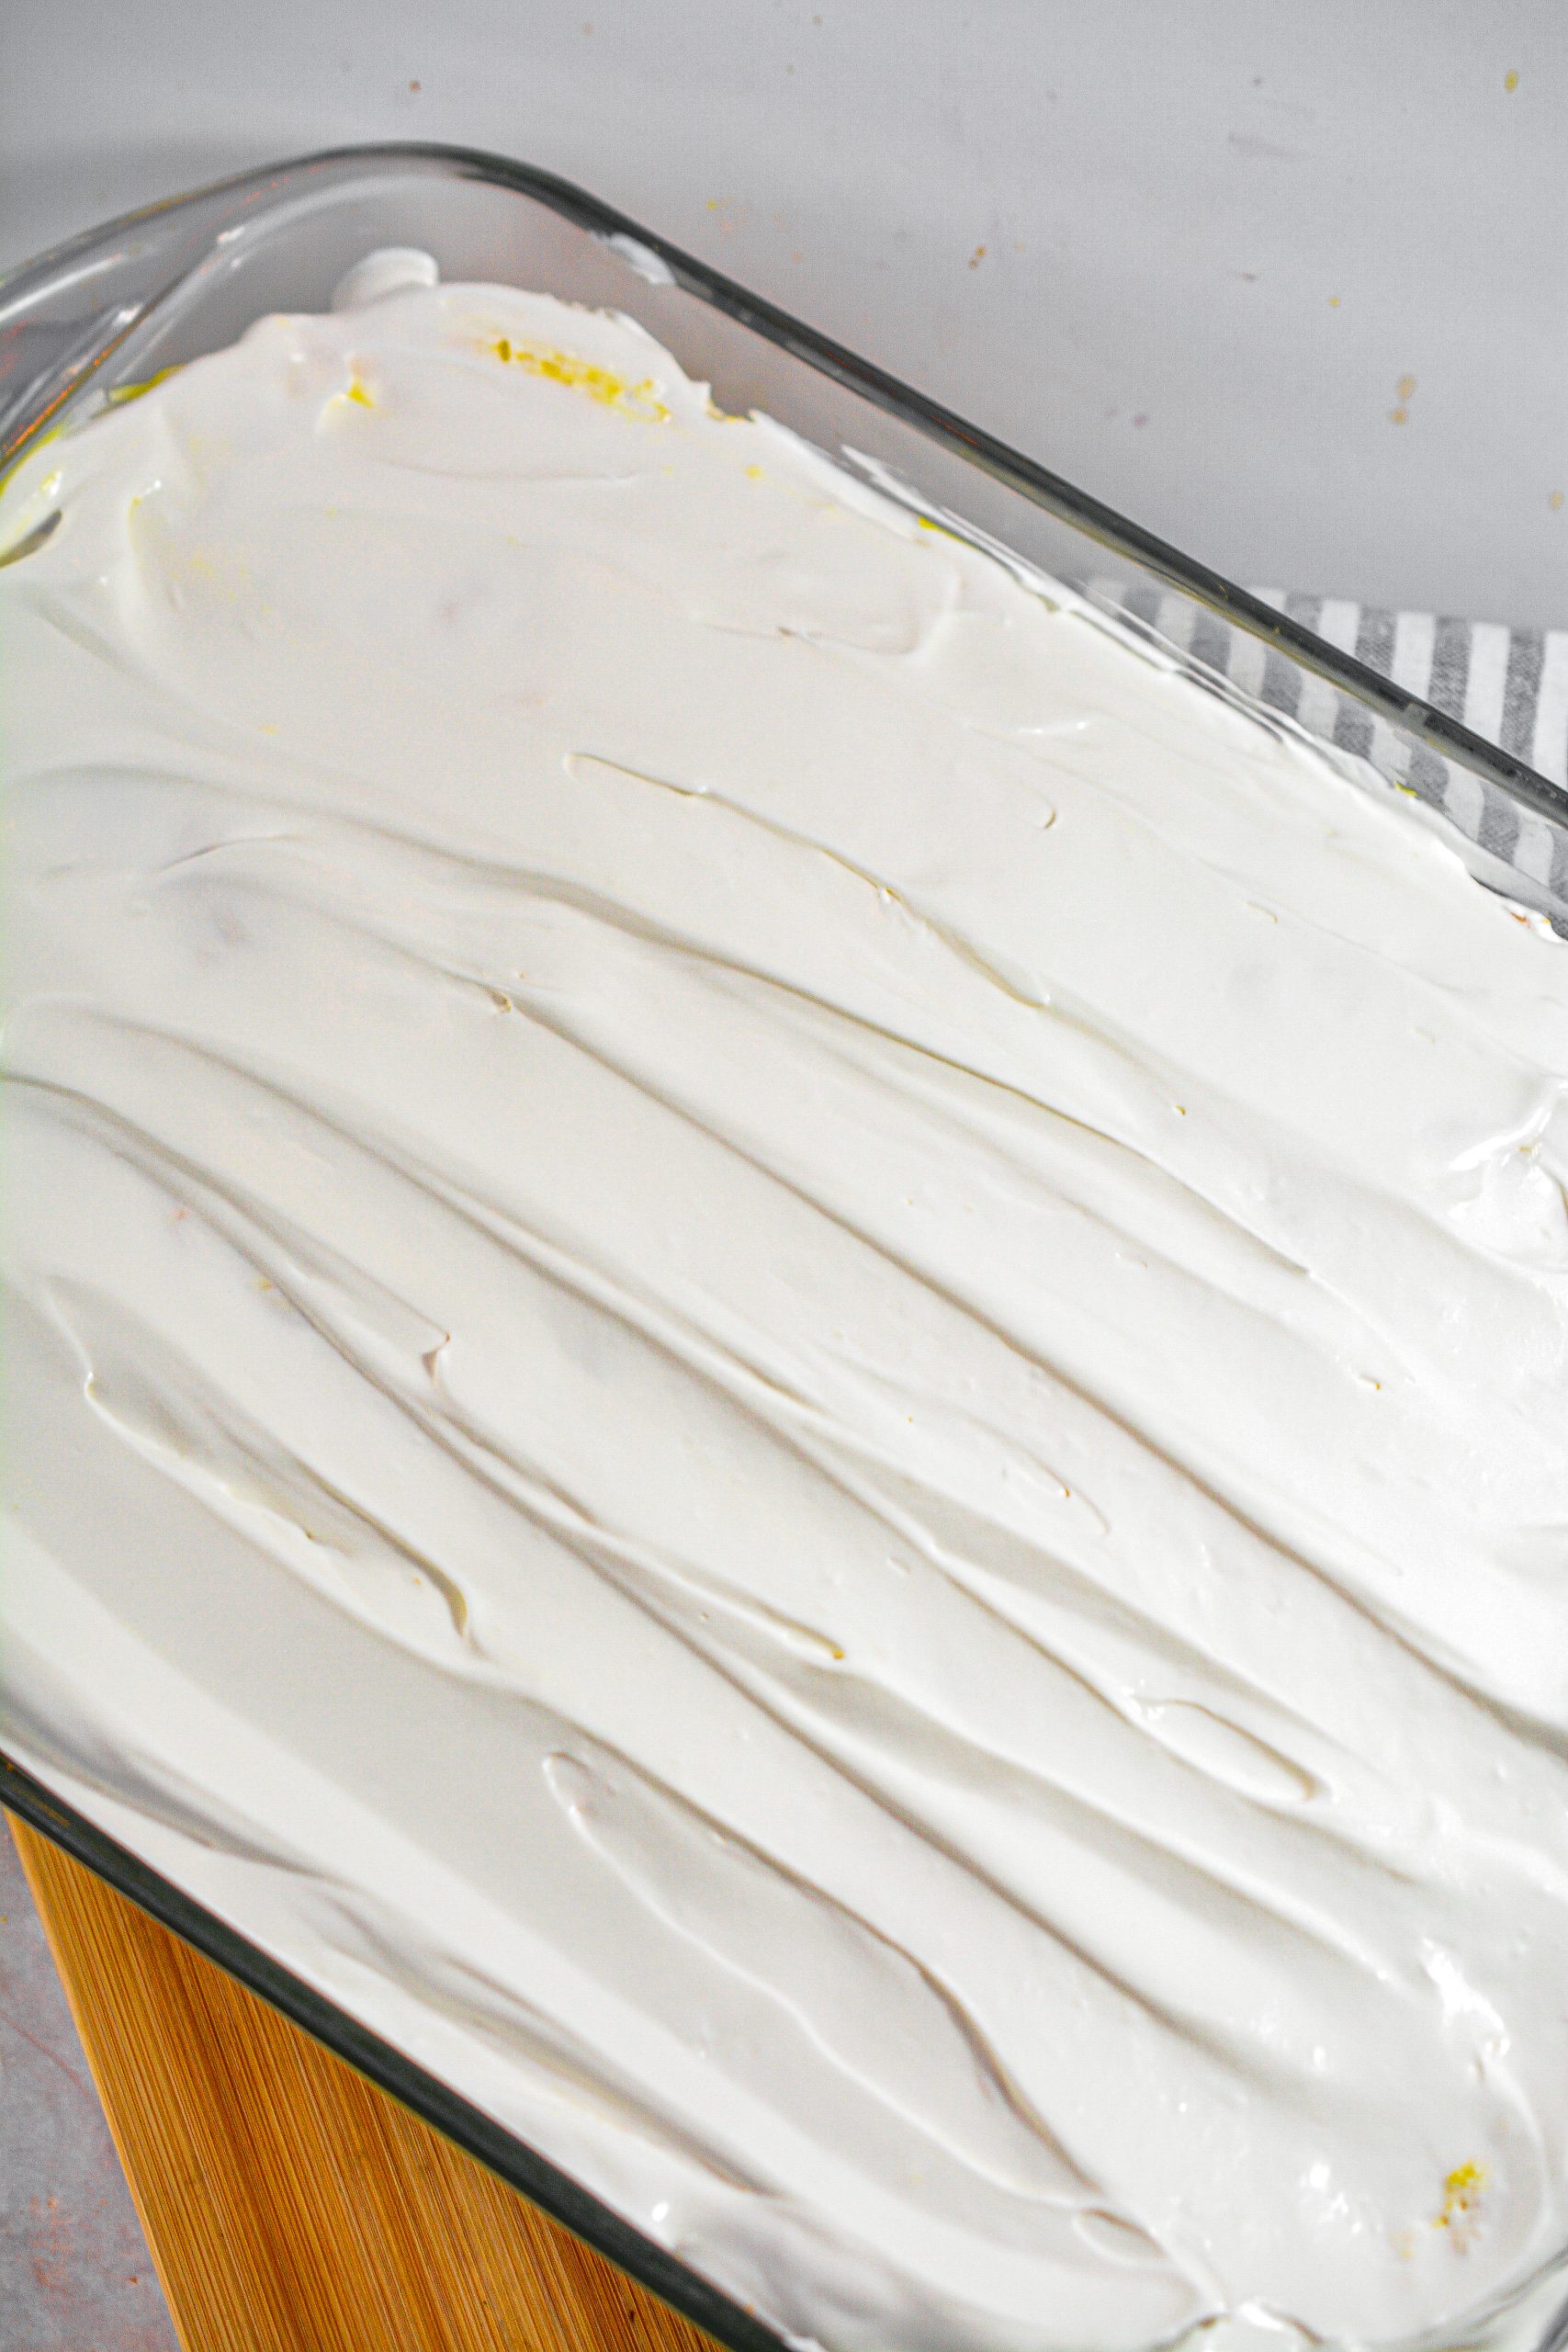 Spread the Cool Whip over the pudding layer.